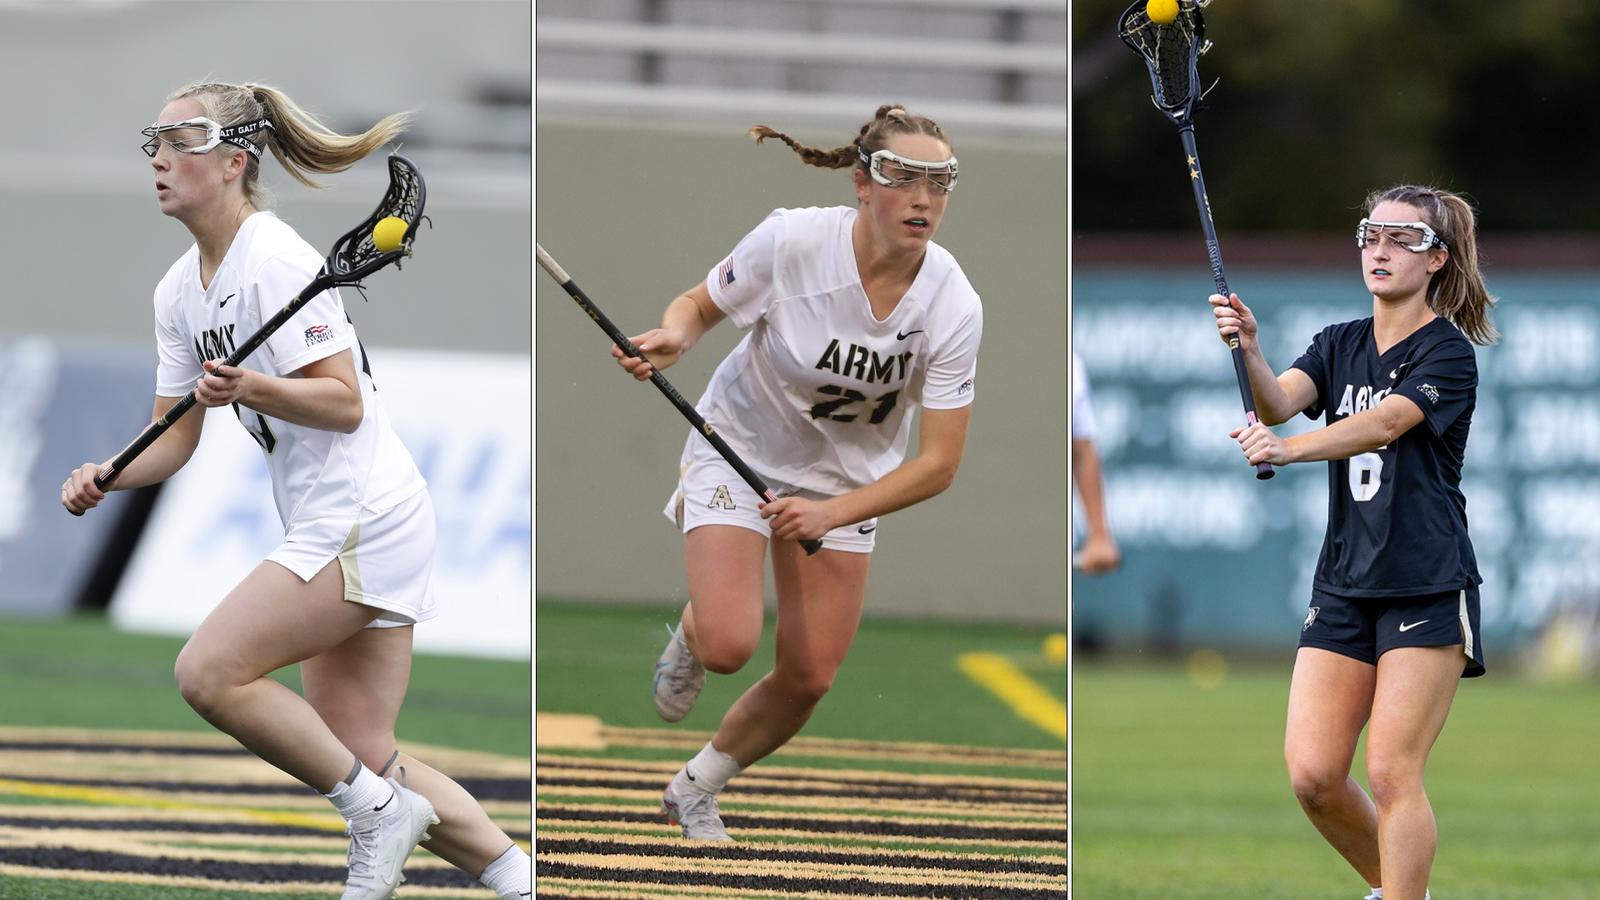 Reilly, Duffy & Remaly Earn Women’s Lacrosse Weekly Patriot League Honors